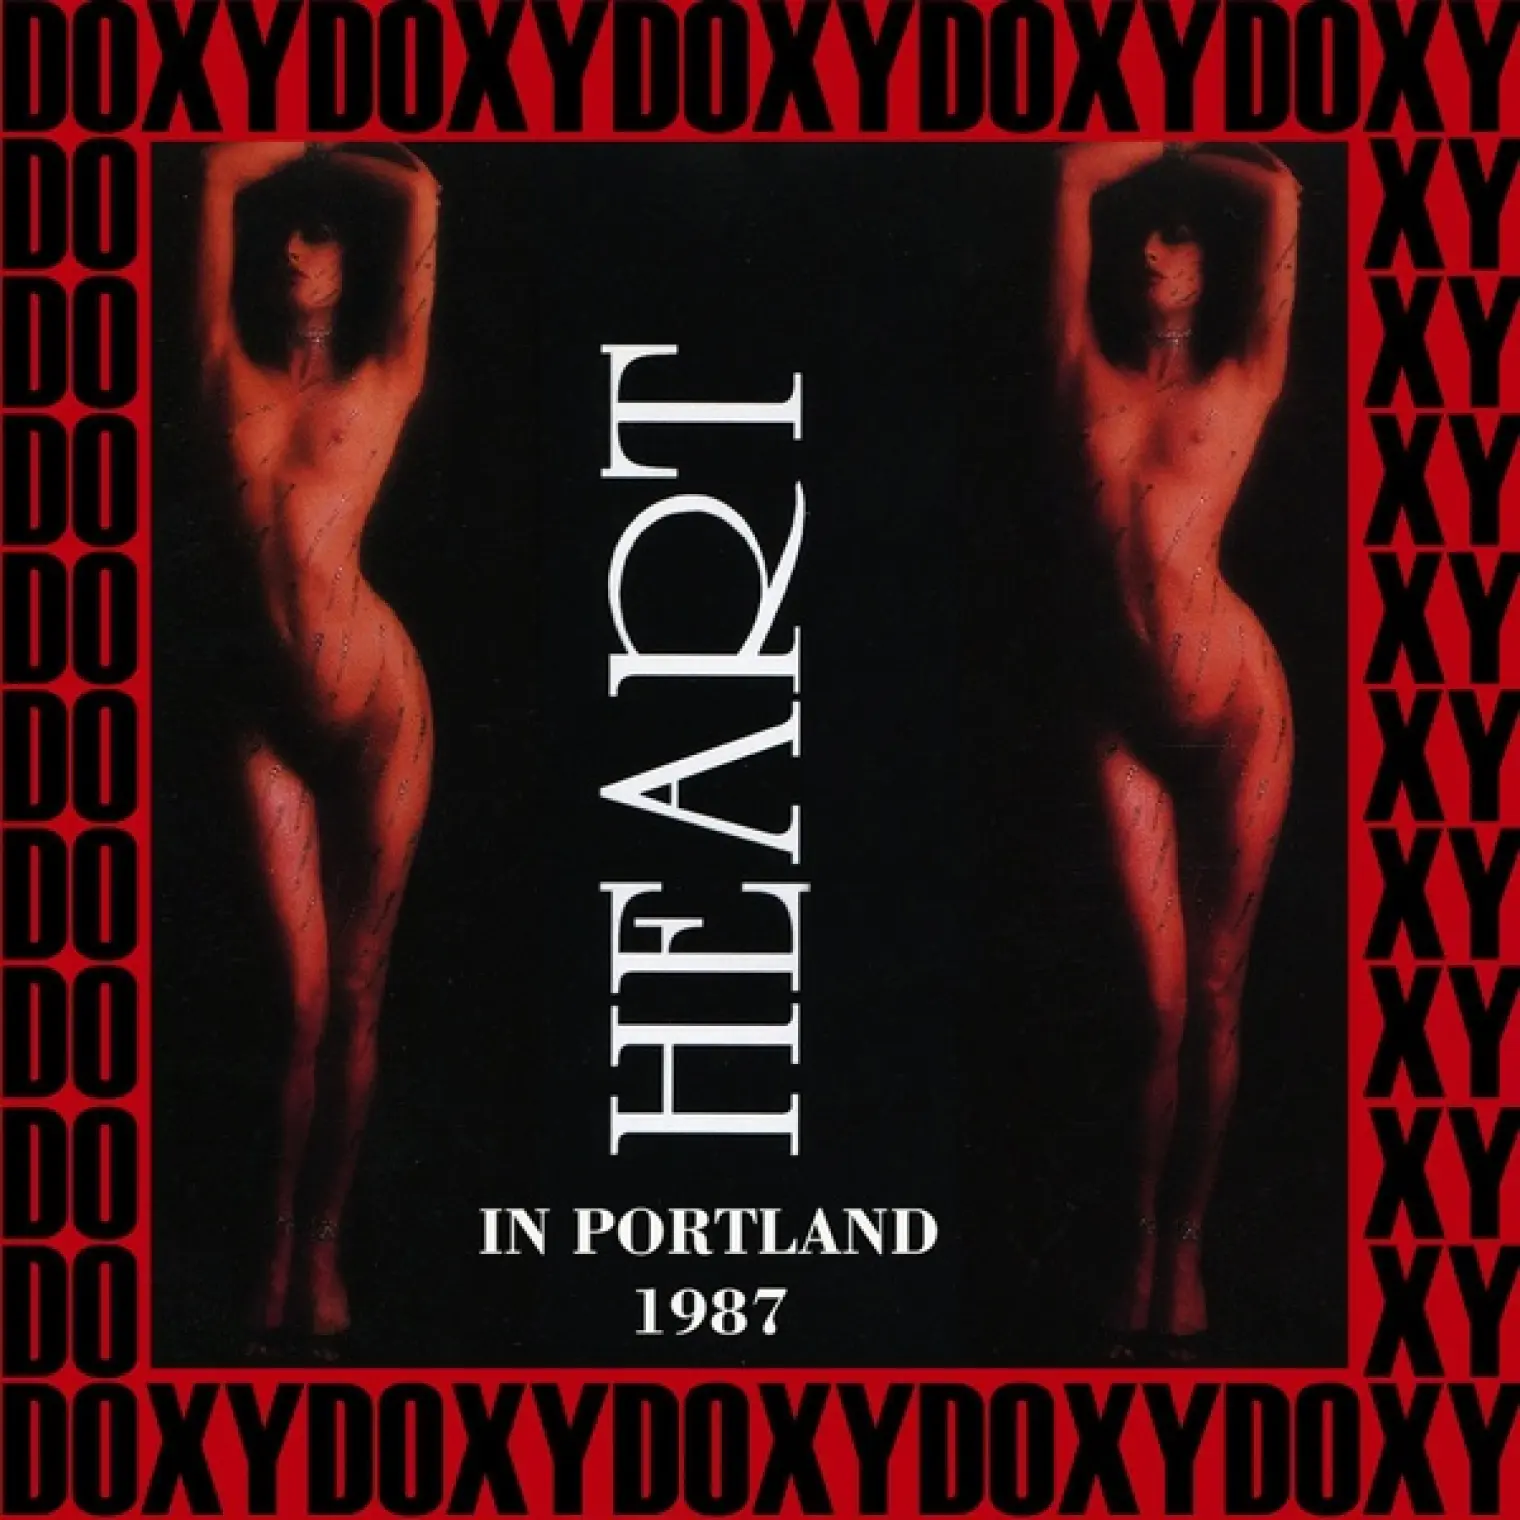 Portland Colloseum, Portland, 1987 (Doxy Collection, Remastered, Live on Fm Broadcasting) -  Heart 